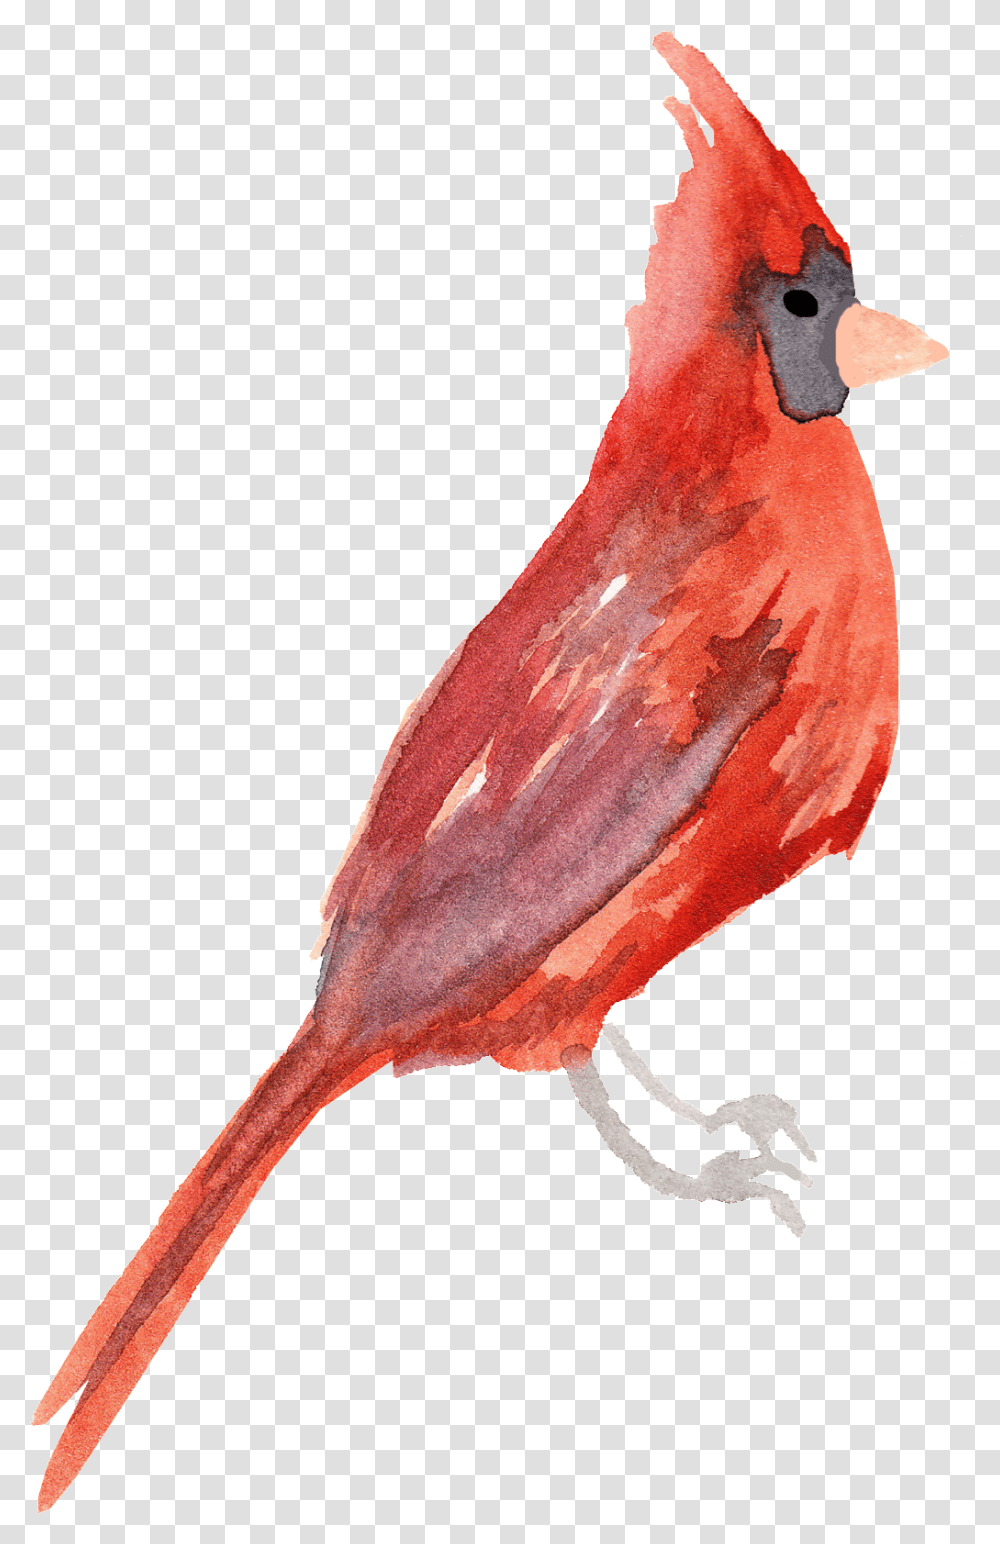 Crystal Red Bird Decorative Free Download, Animal, Cardinal, Chicken, Poultry Transparent Png